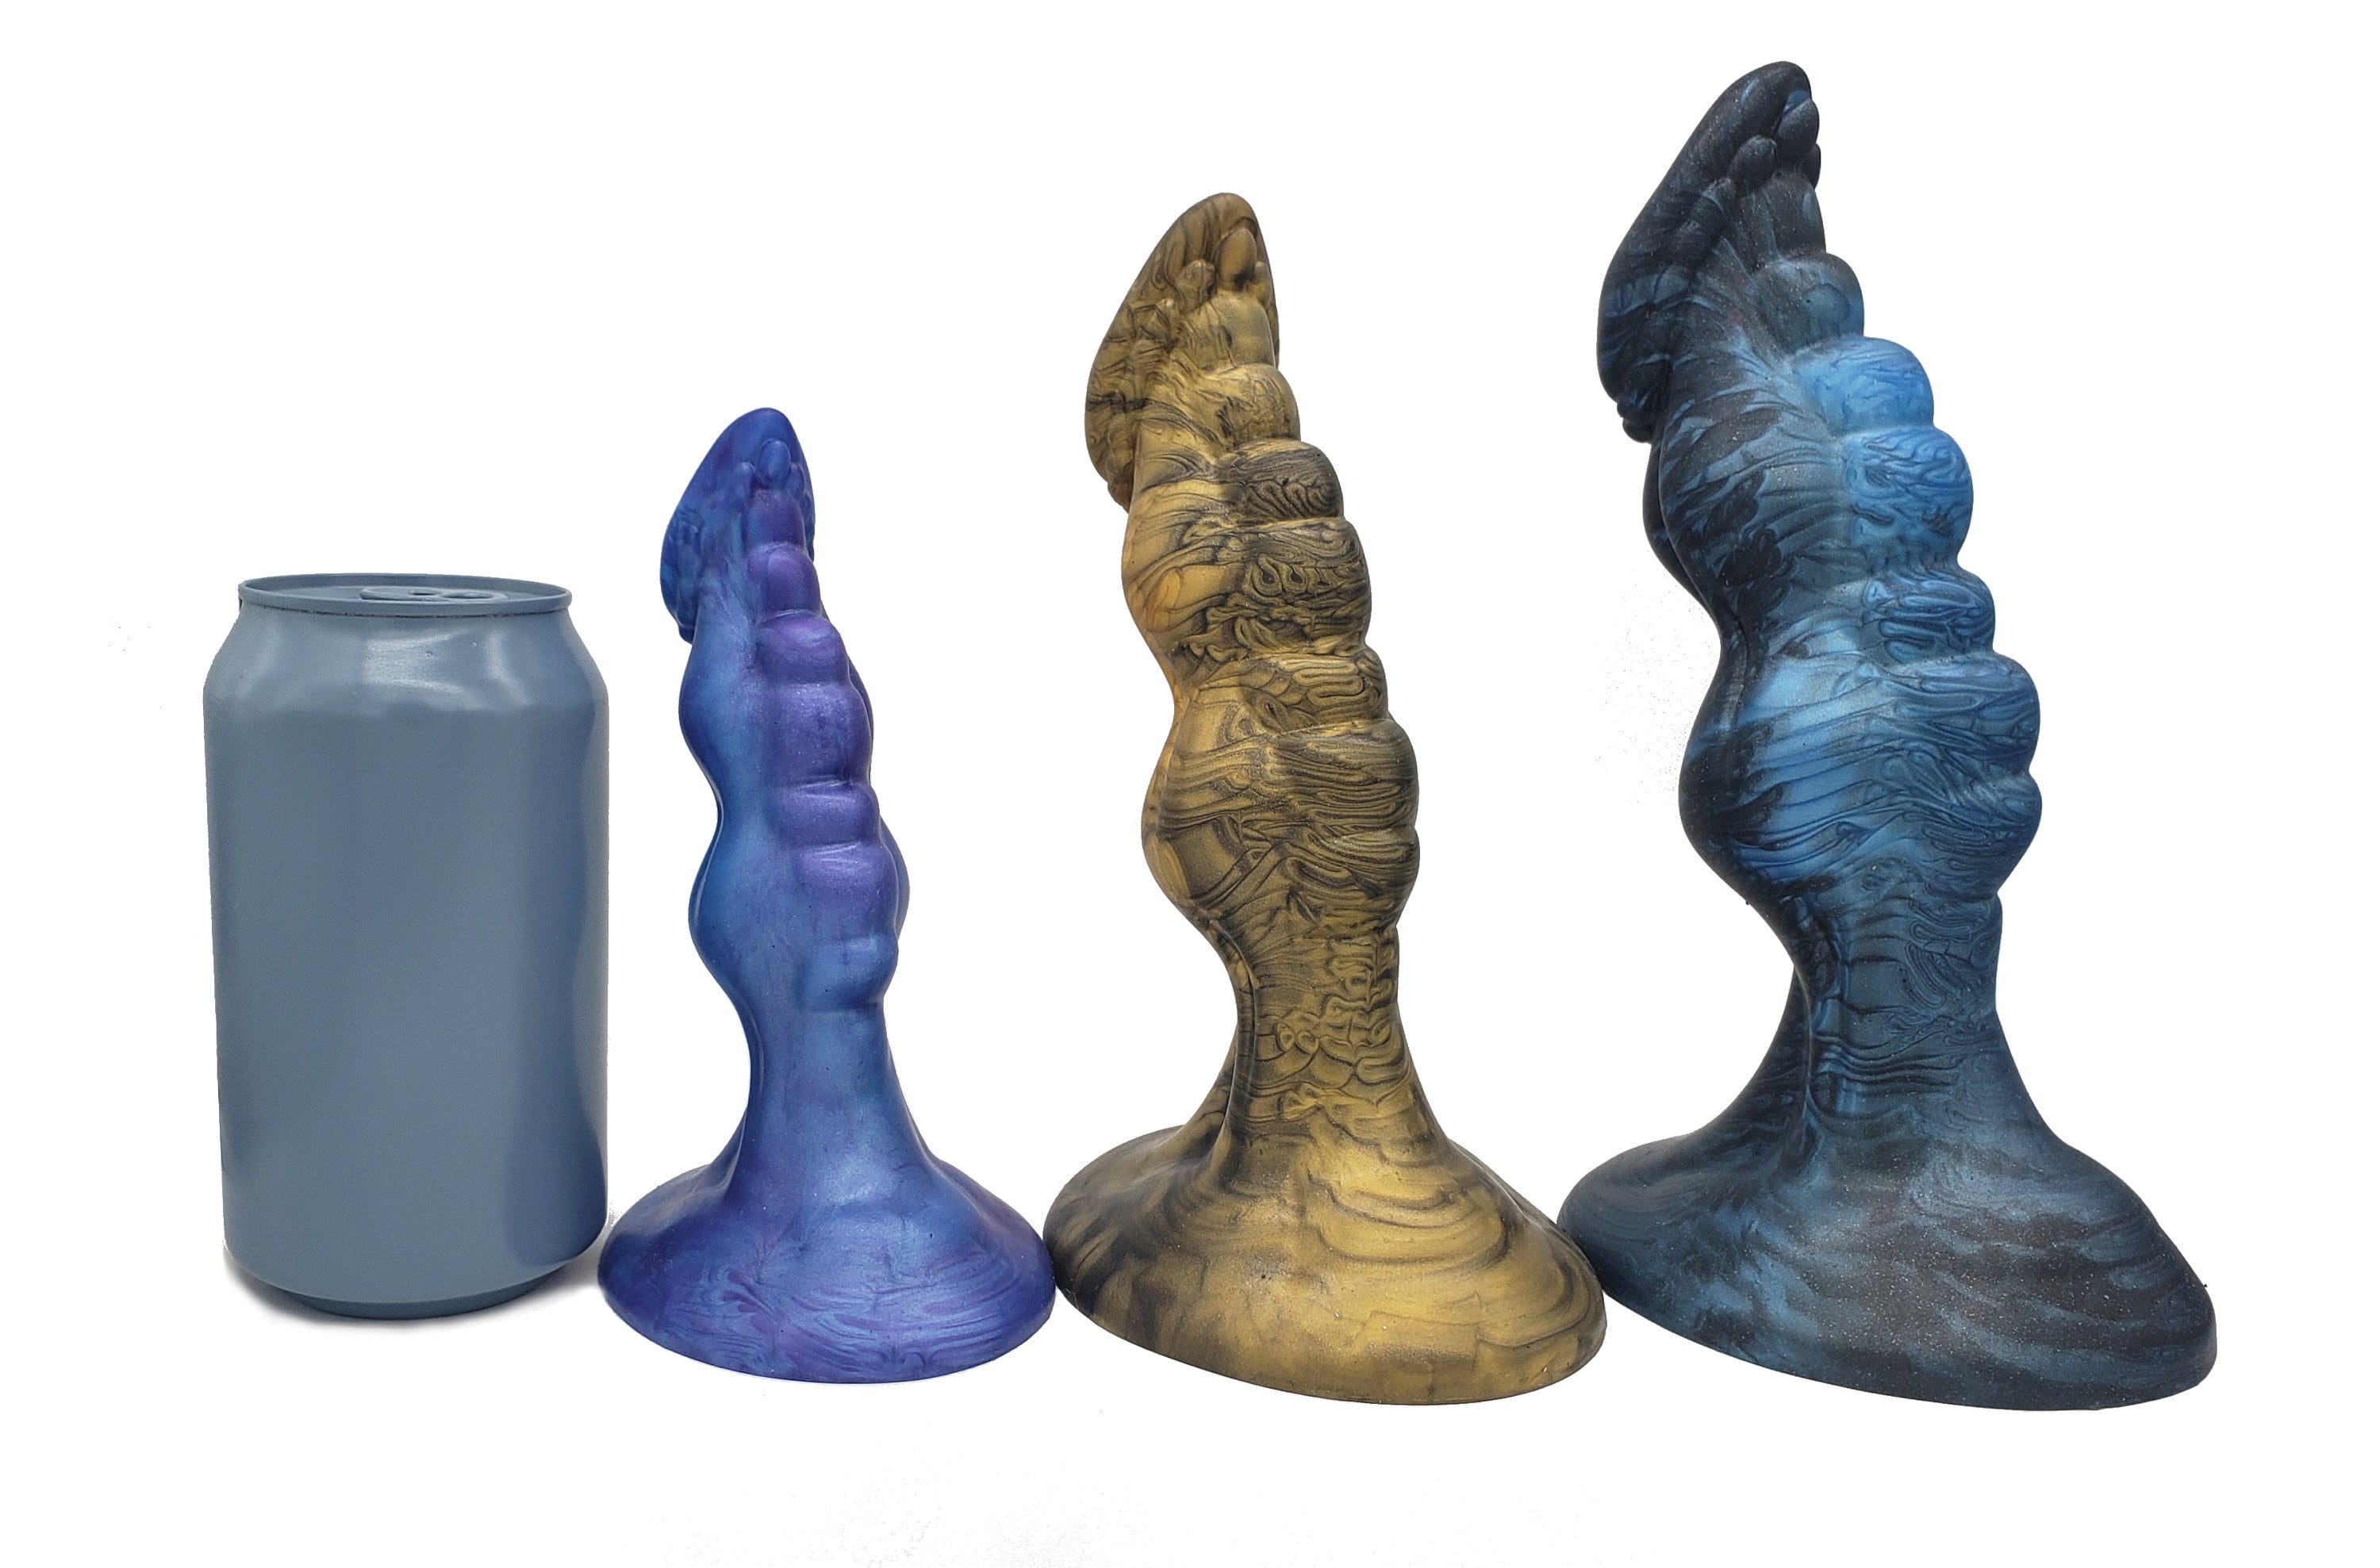 ajay dassar recommends bad dragon knock off pic